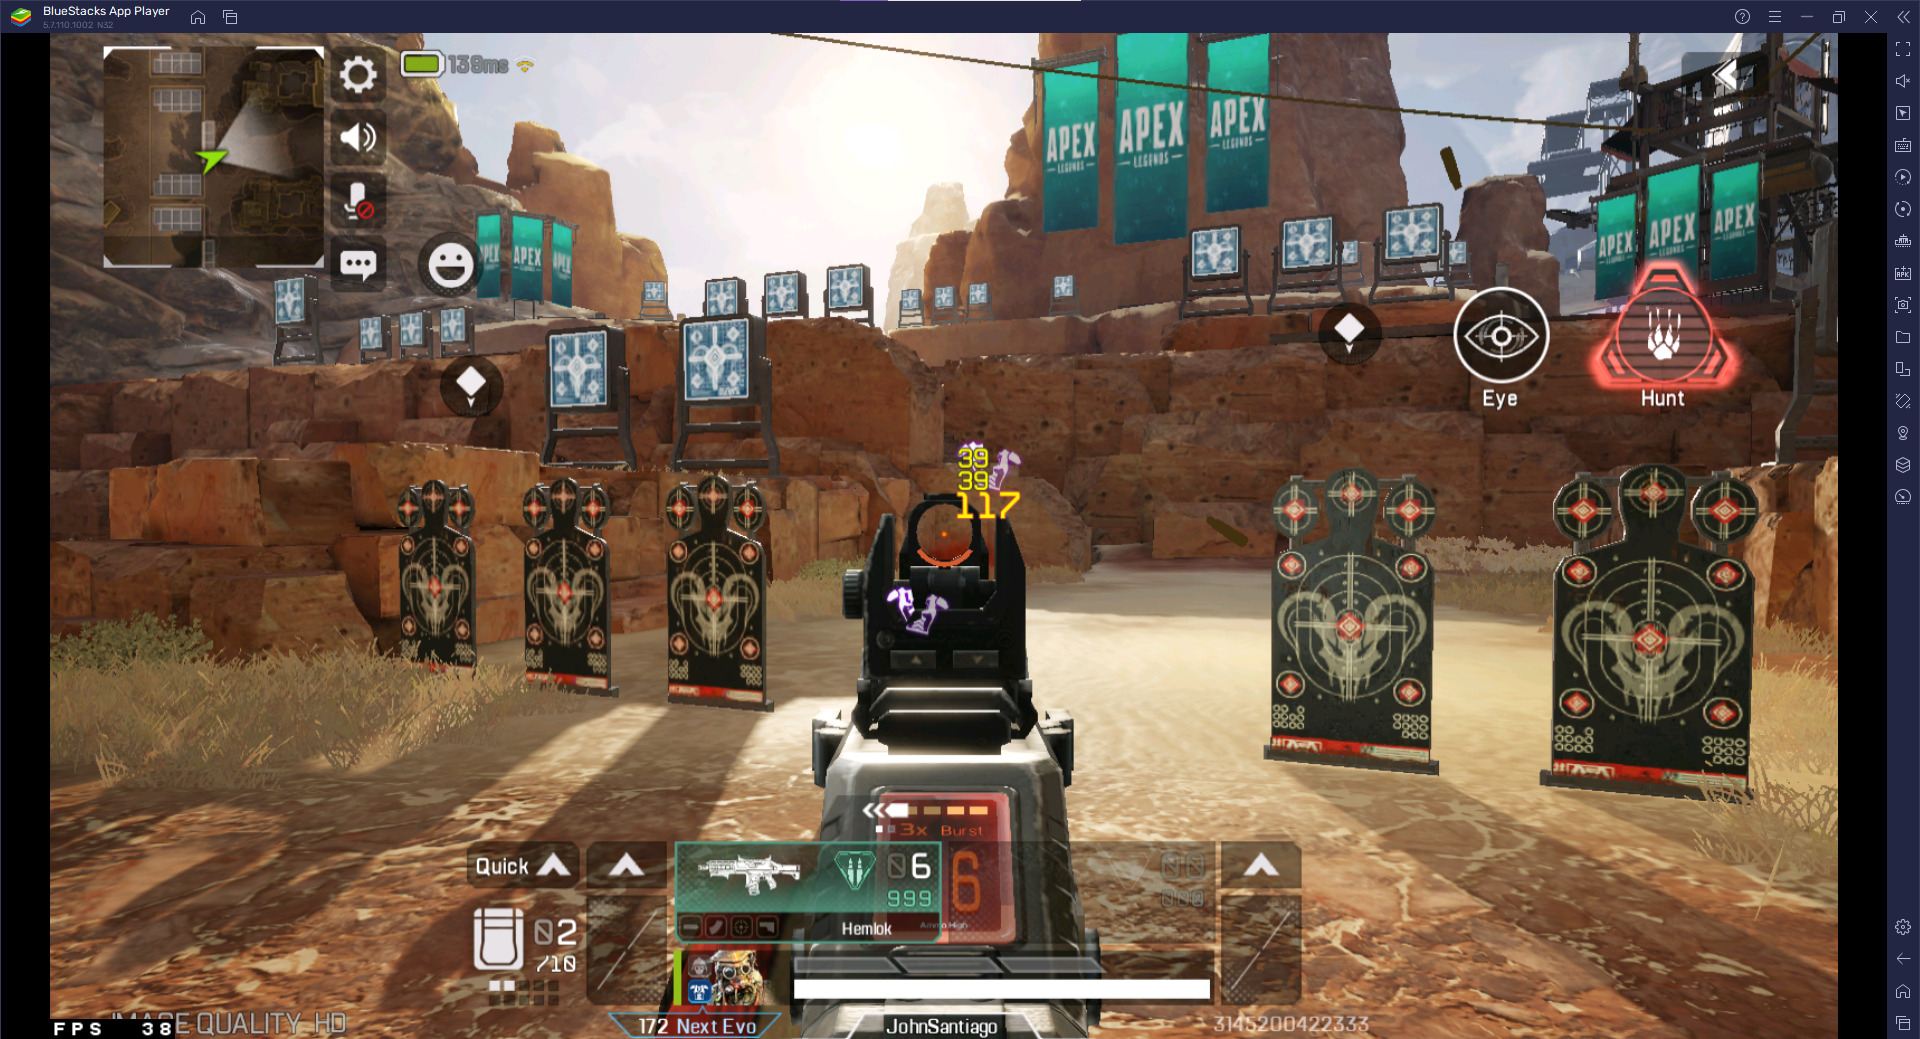 How to download and play Apex Legends Mobile in Android. Step-by